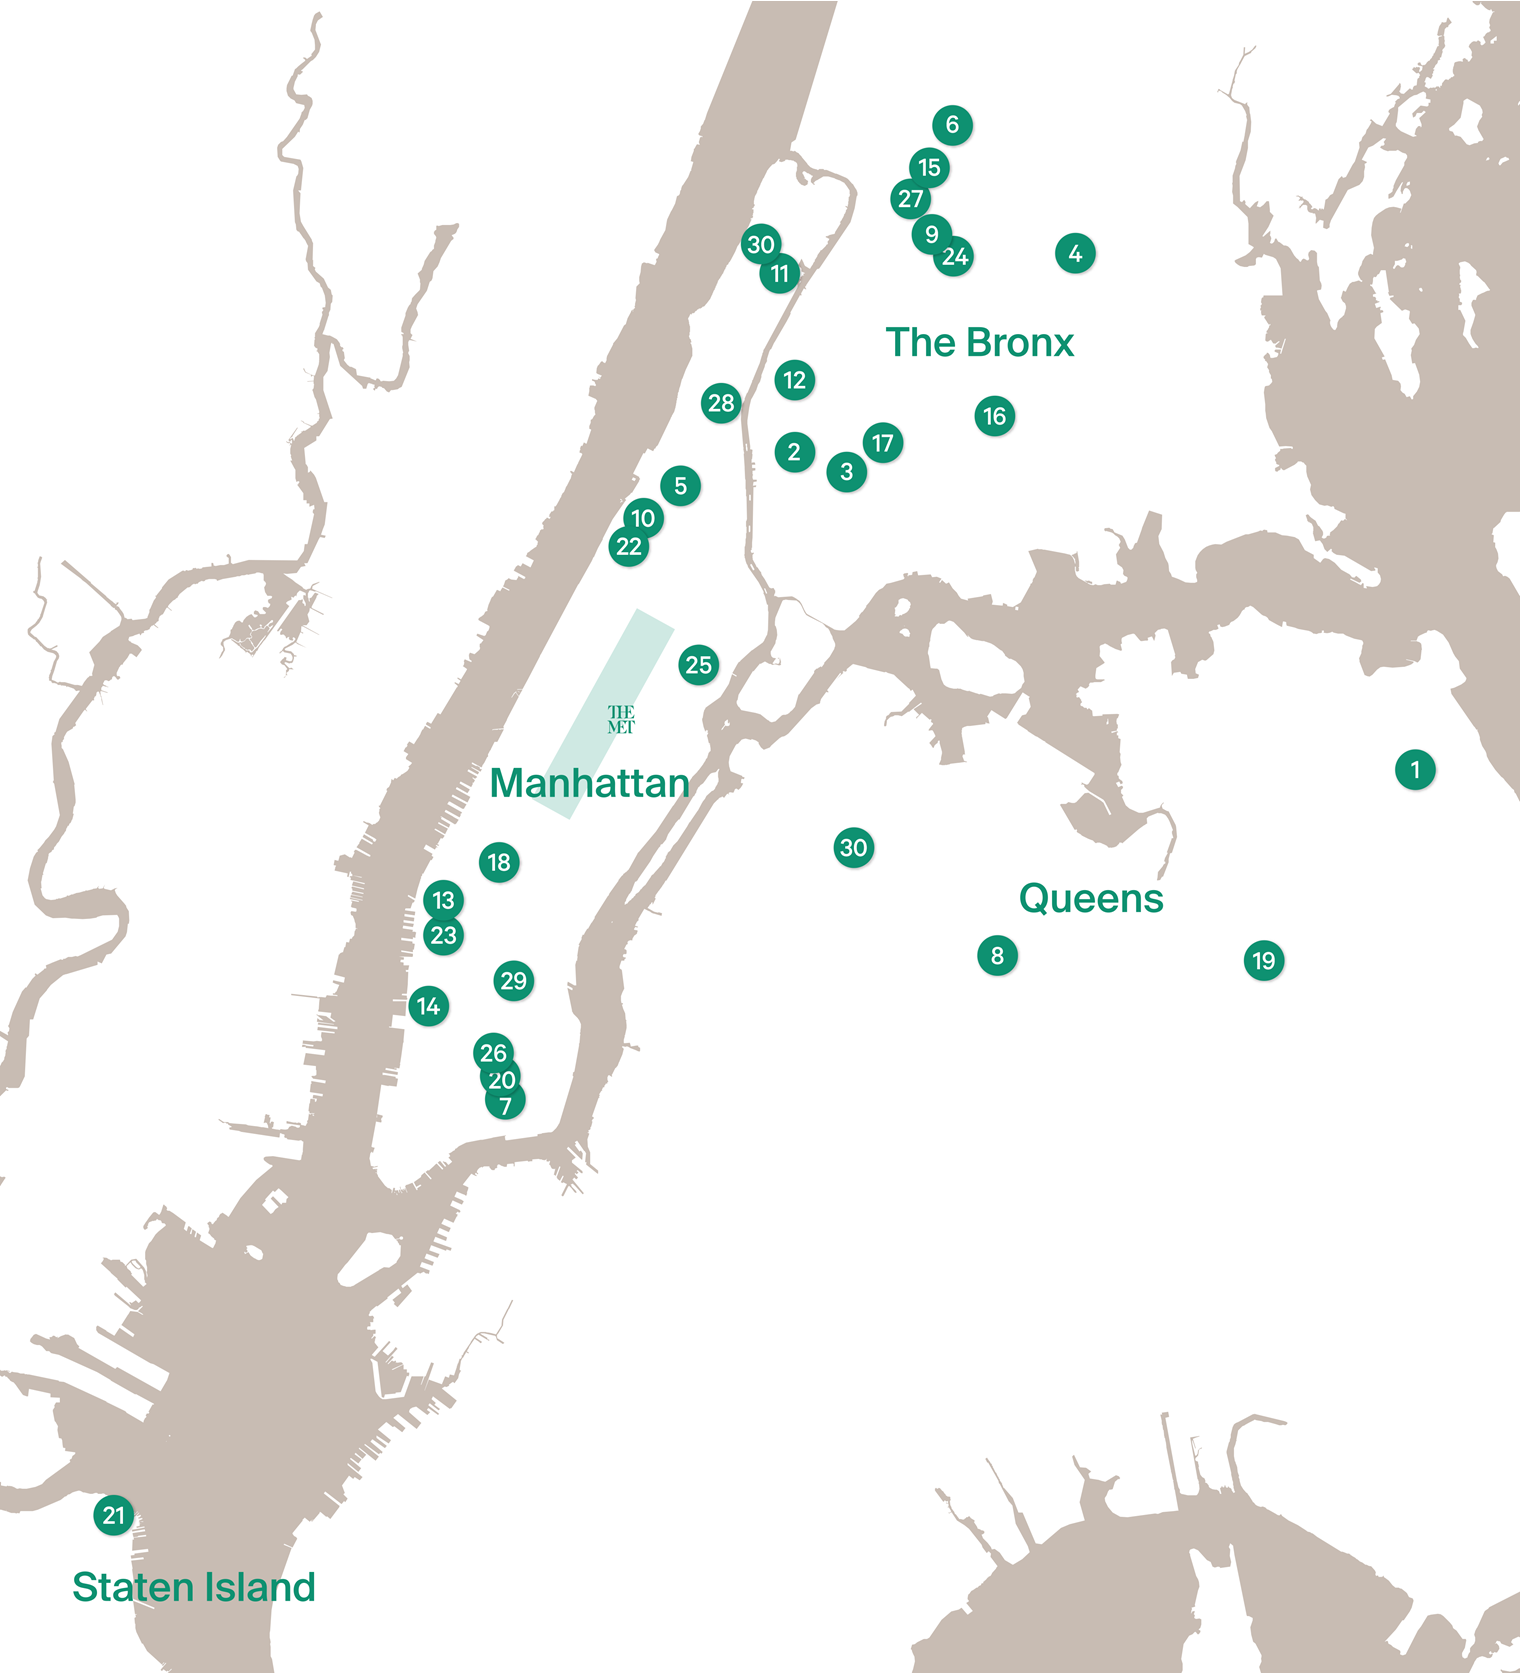 A map of New York City depicting participating locations of the original exhibition.